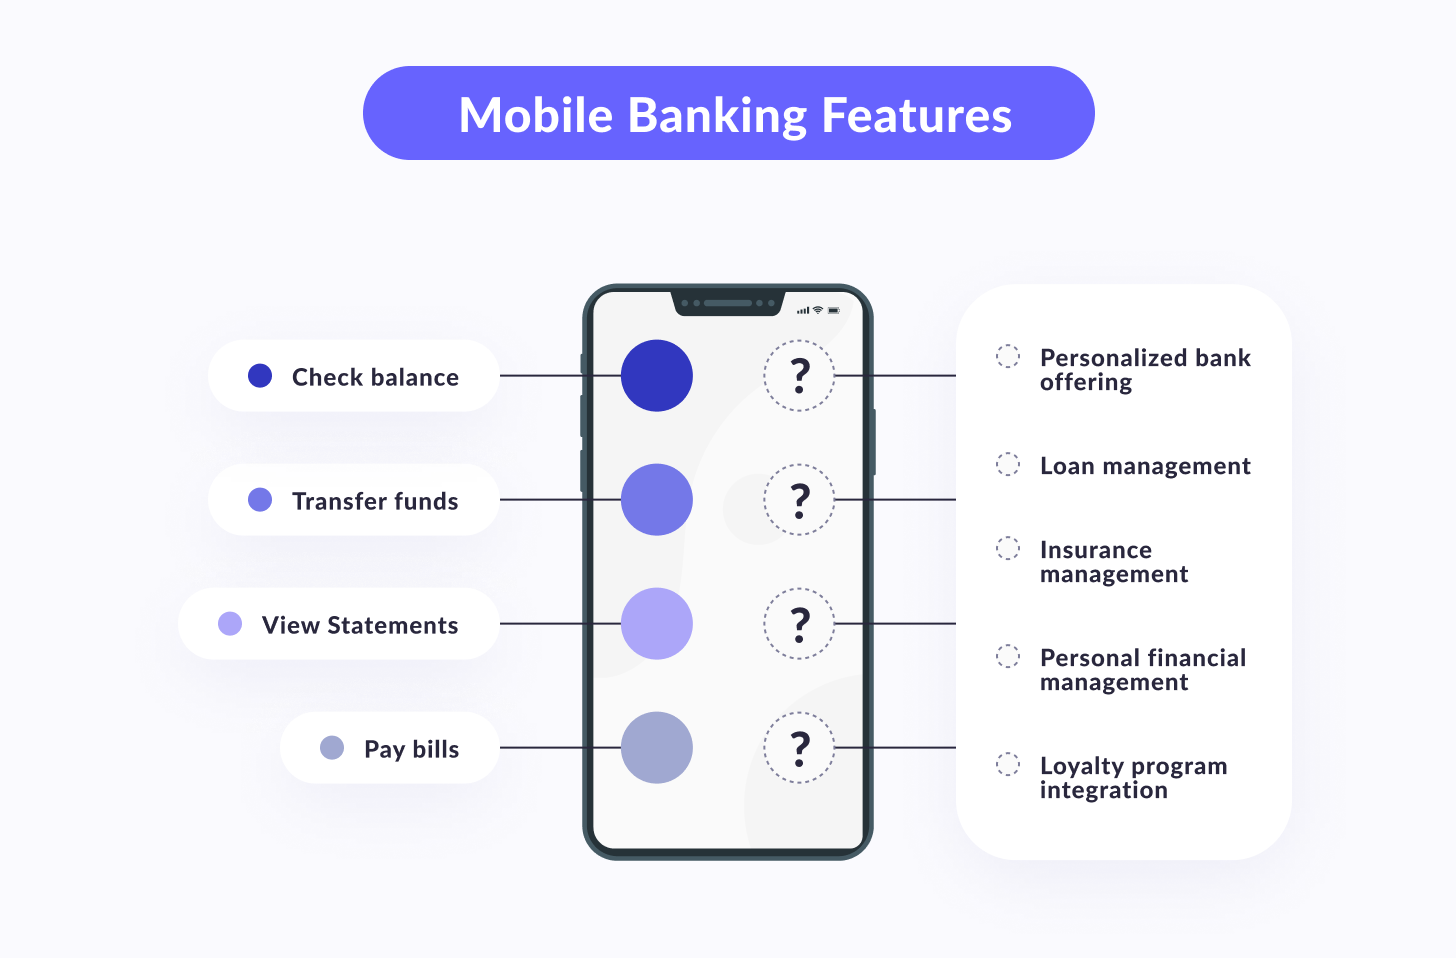 Mobile banking features